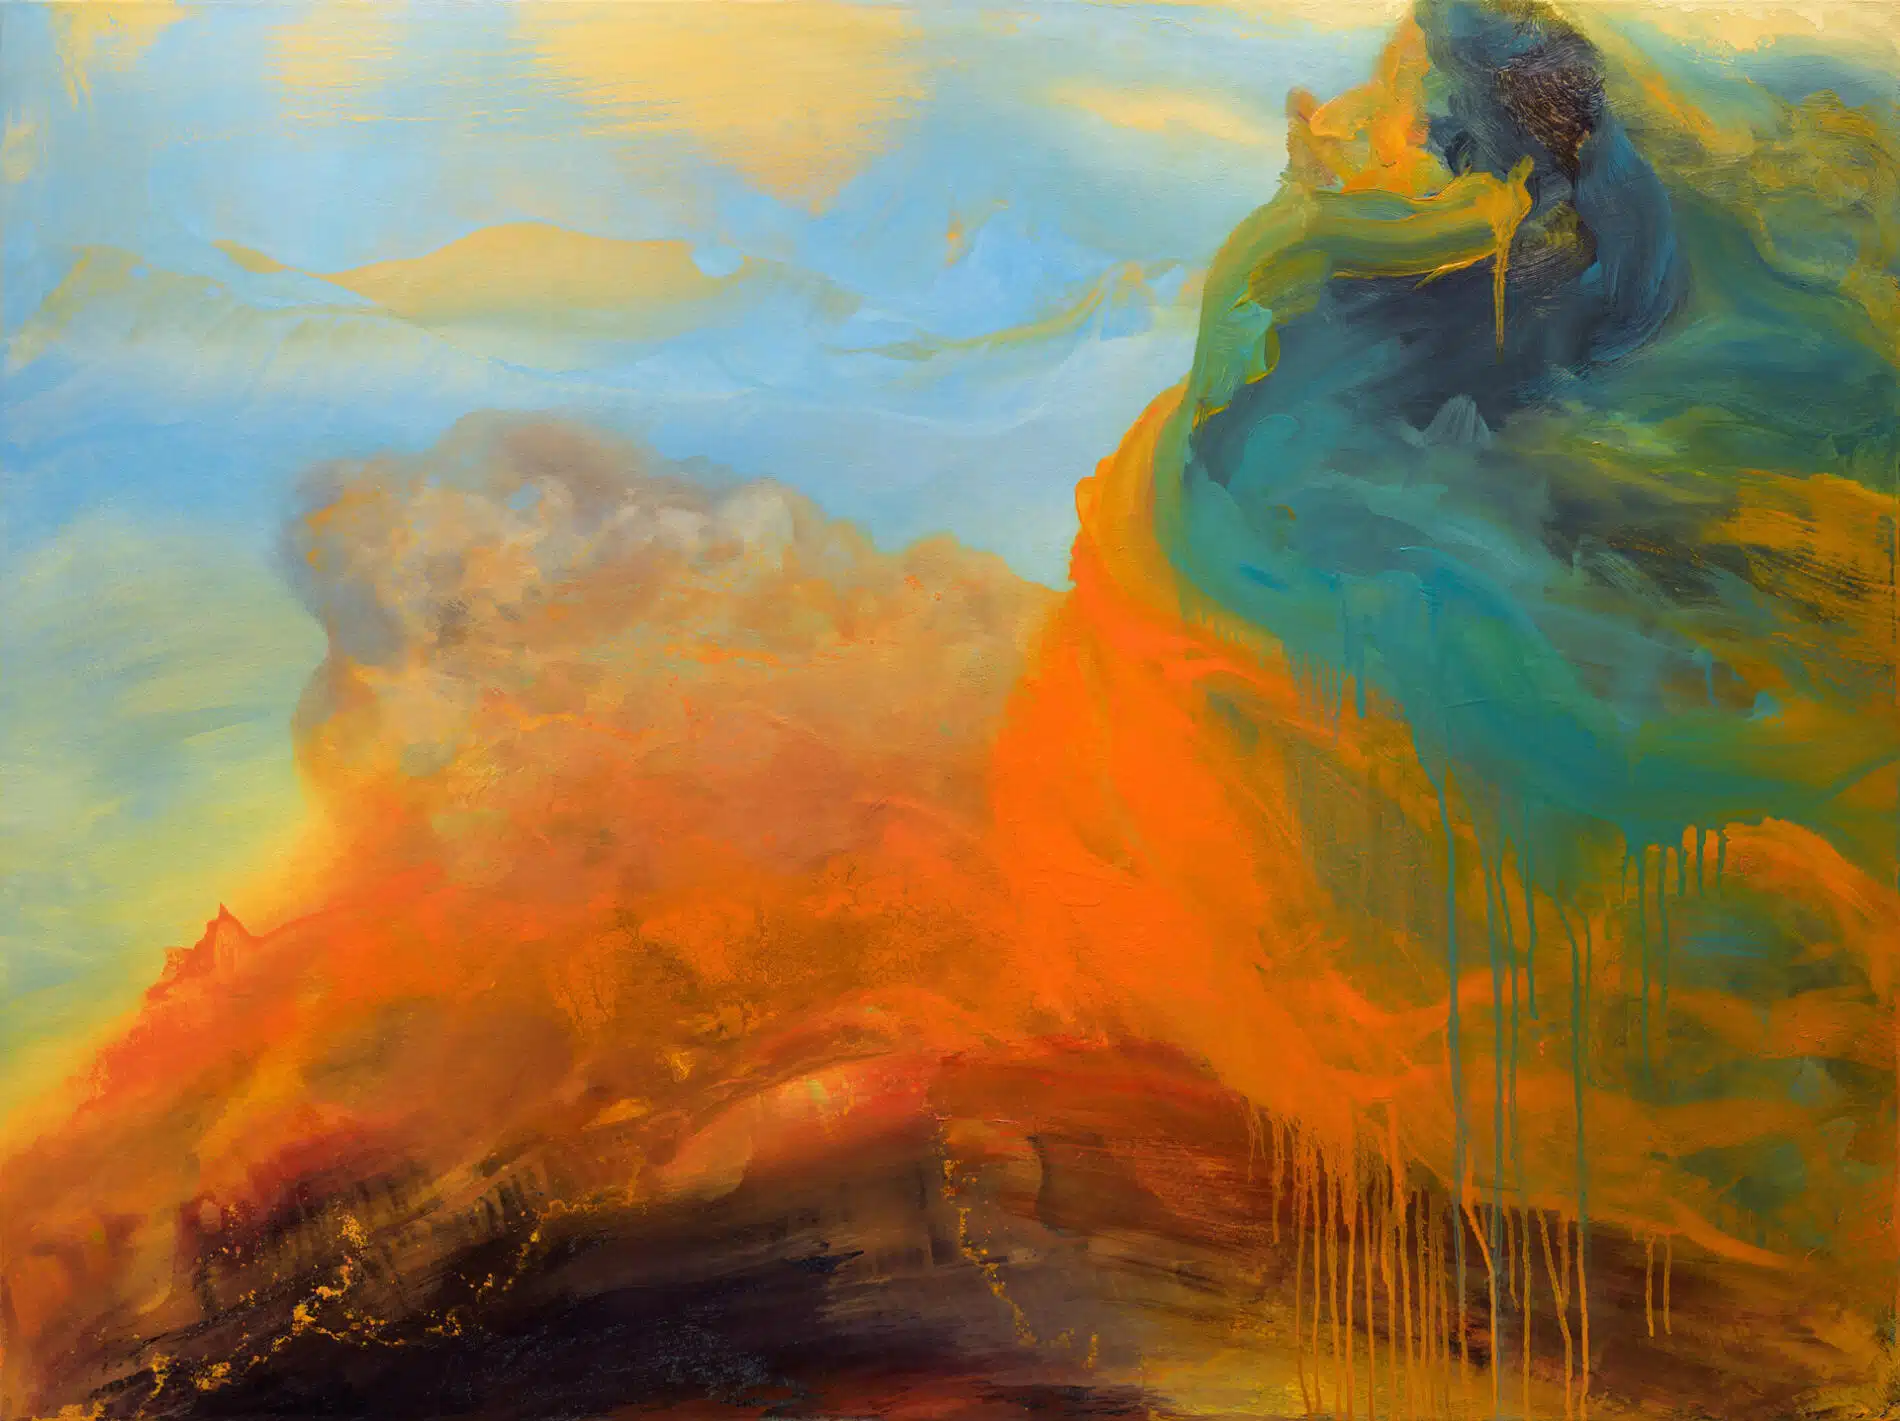 Samantha Keely Smith BLINK AWAY